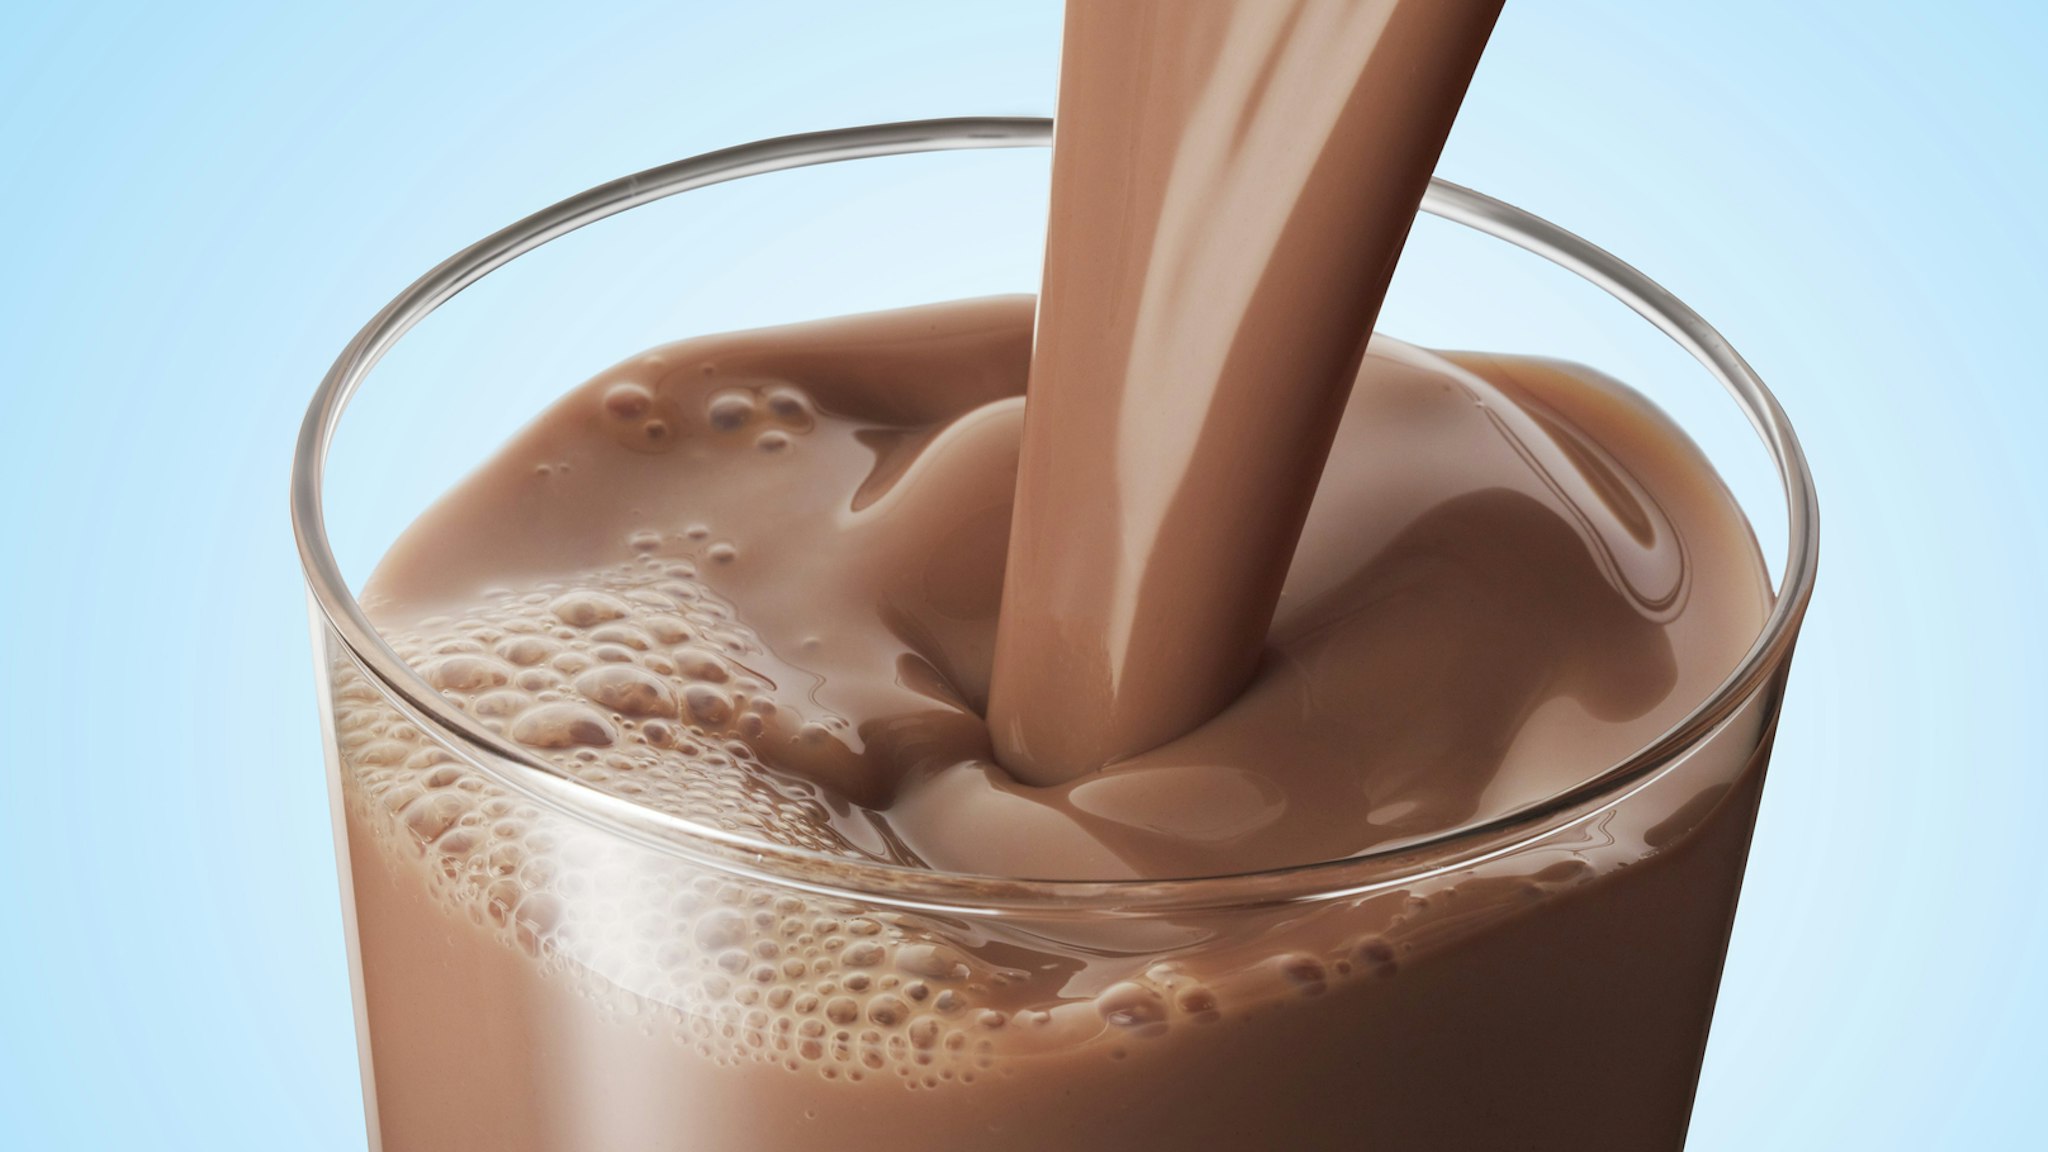 Chocolate milk pouring into a glass.